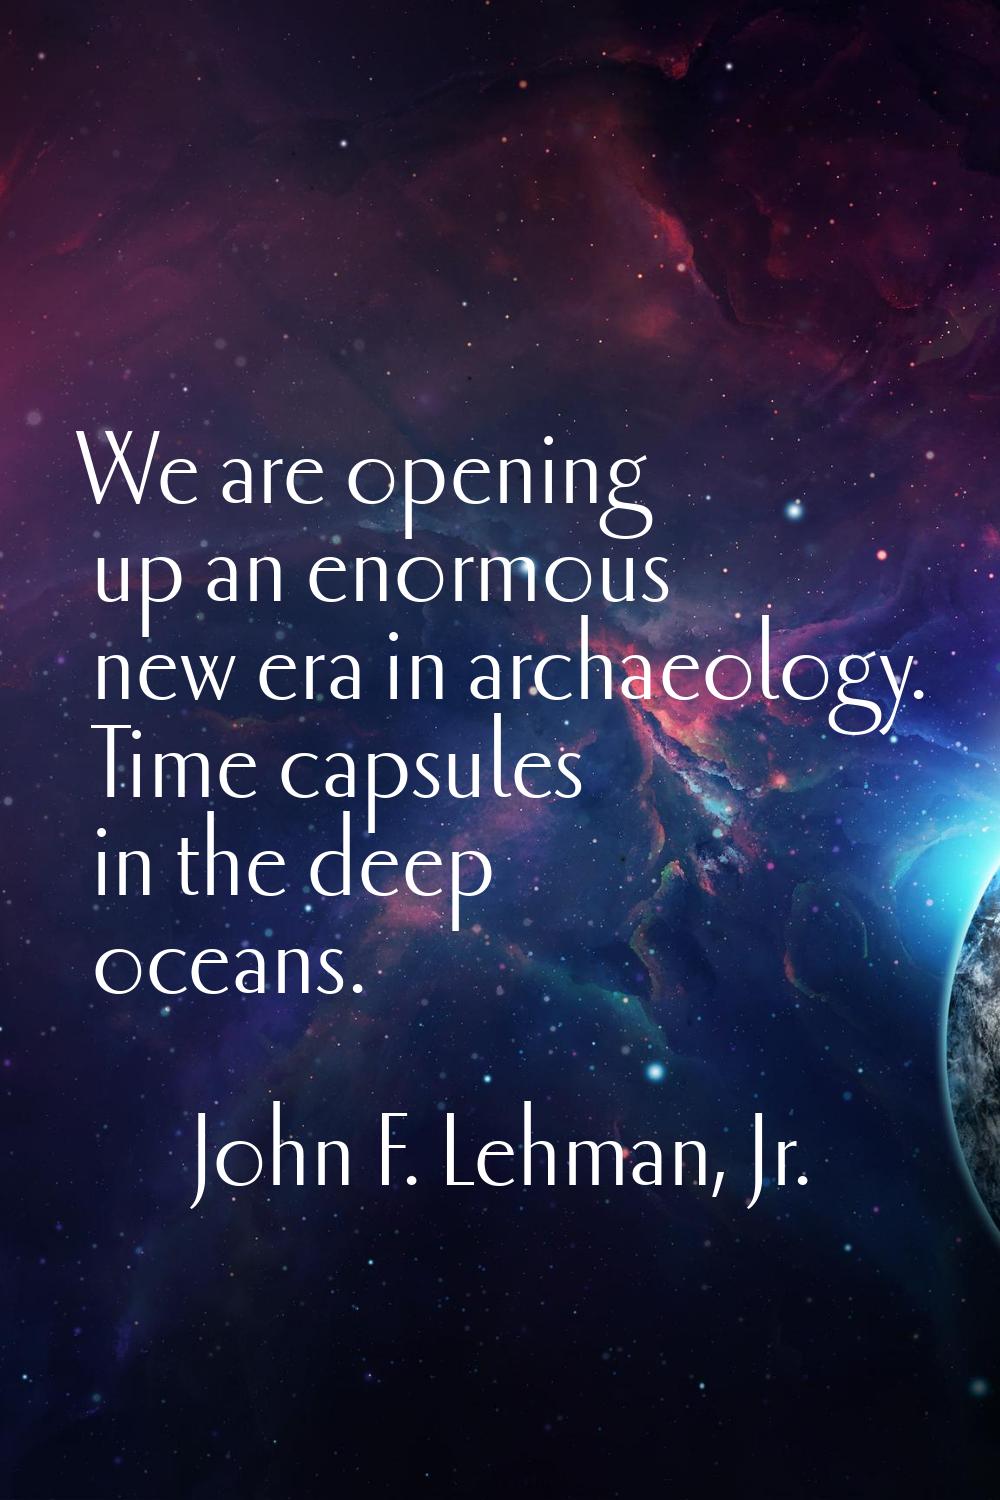 We are opening up an enormous new era in archaeology. Time capsules in the deep oceans.